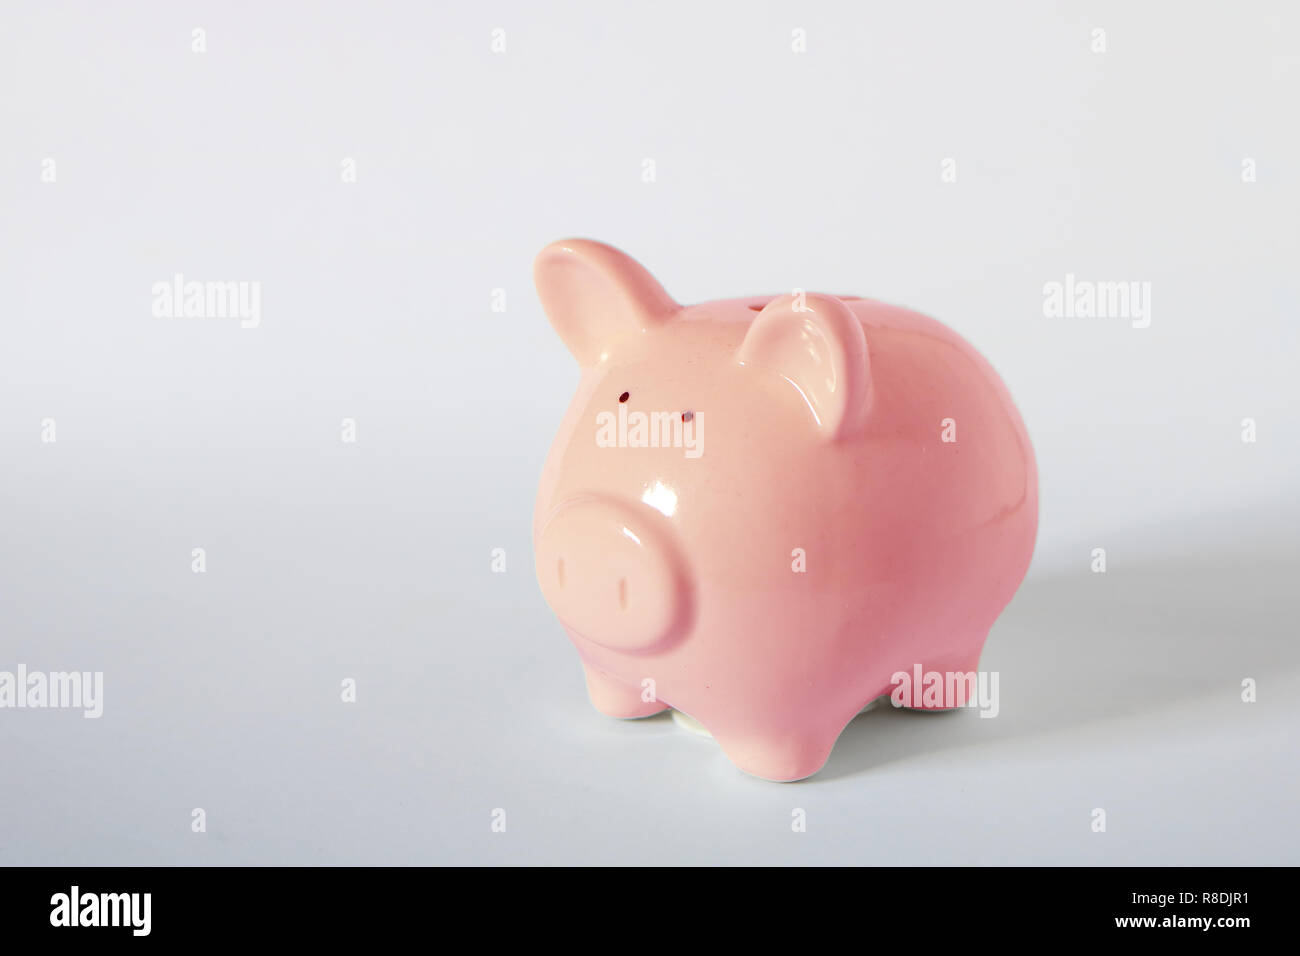 Photo image concept of saving money, financial wealth management, cute pink piggy bank on white background with some empty space Stock Photo